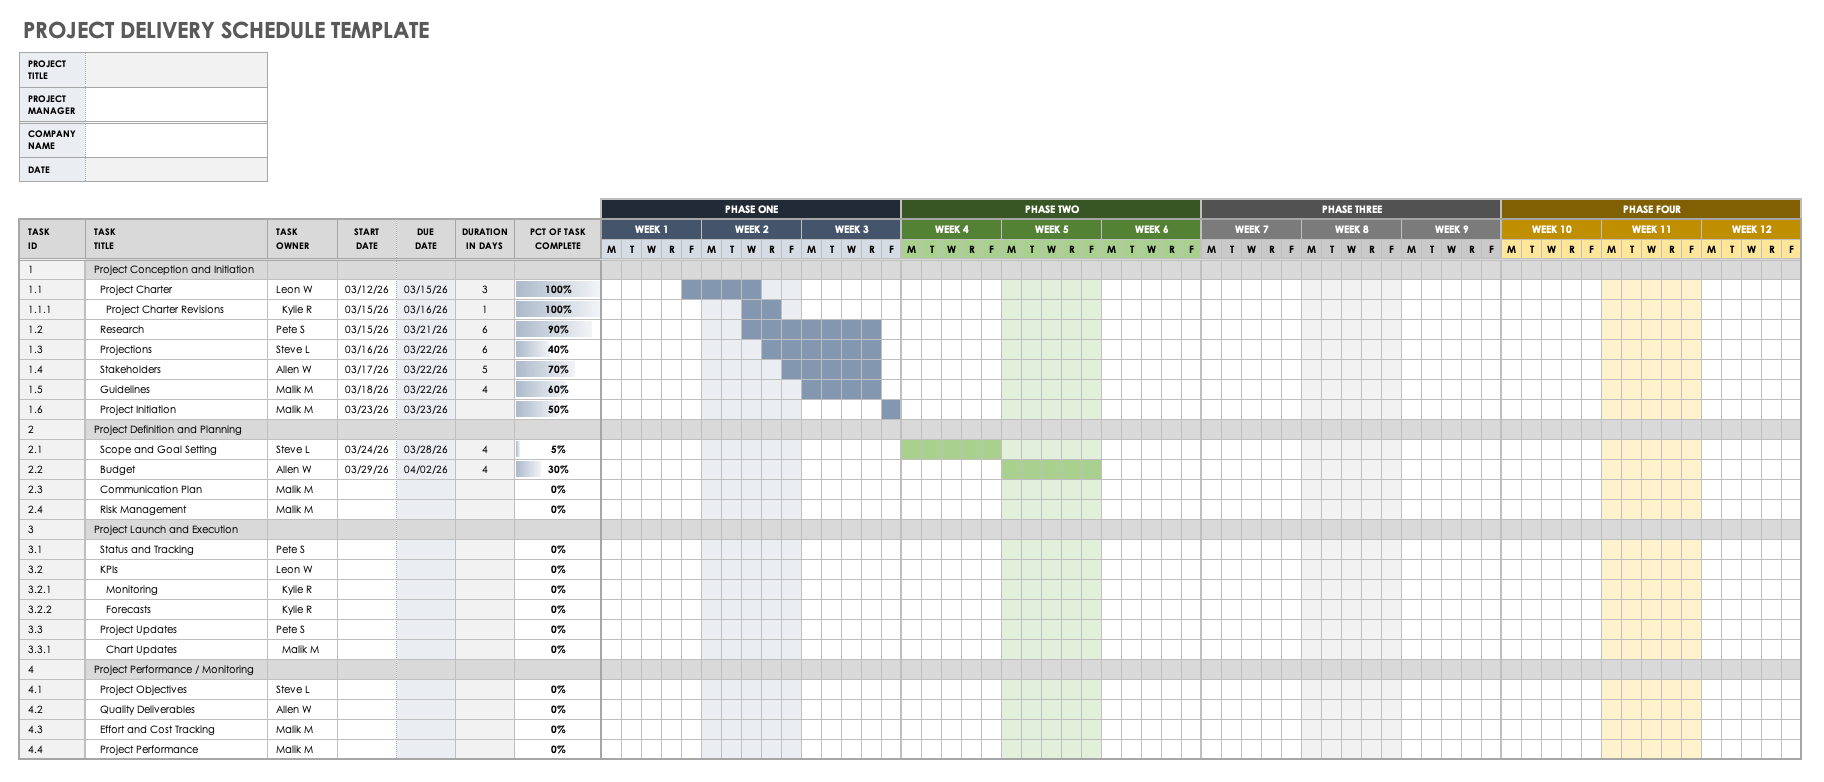 Project Delivery Schedule Template